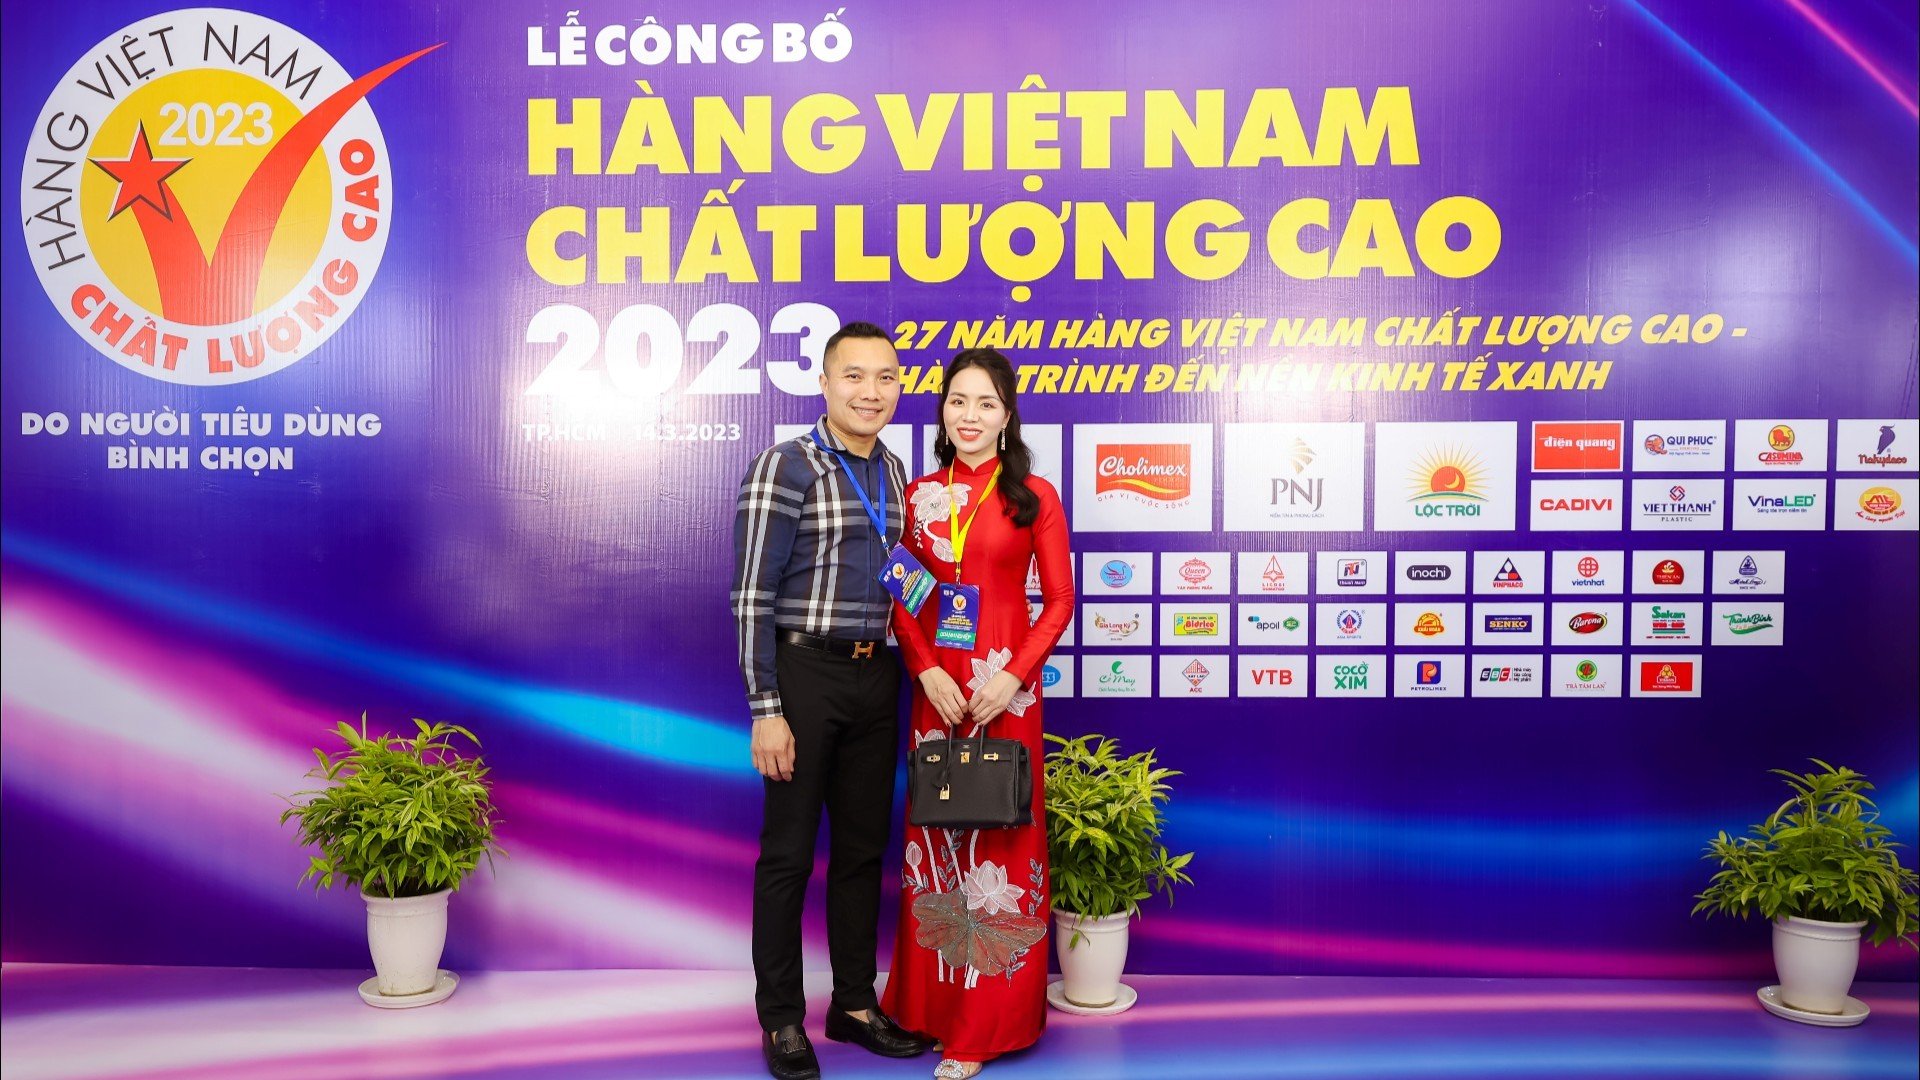 Viet Nhat Plastic is proud to be the High-quality Vietnamese Products in 2023